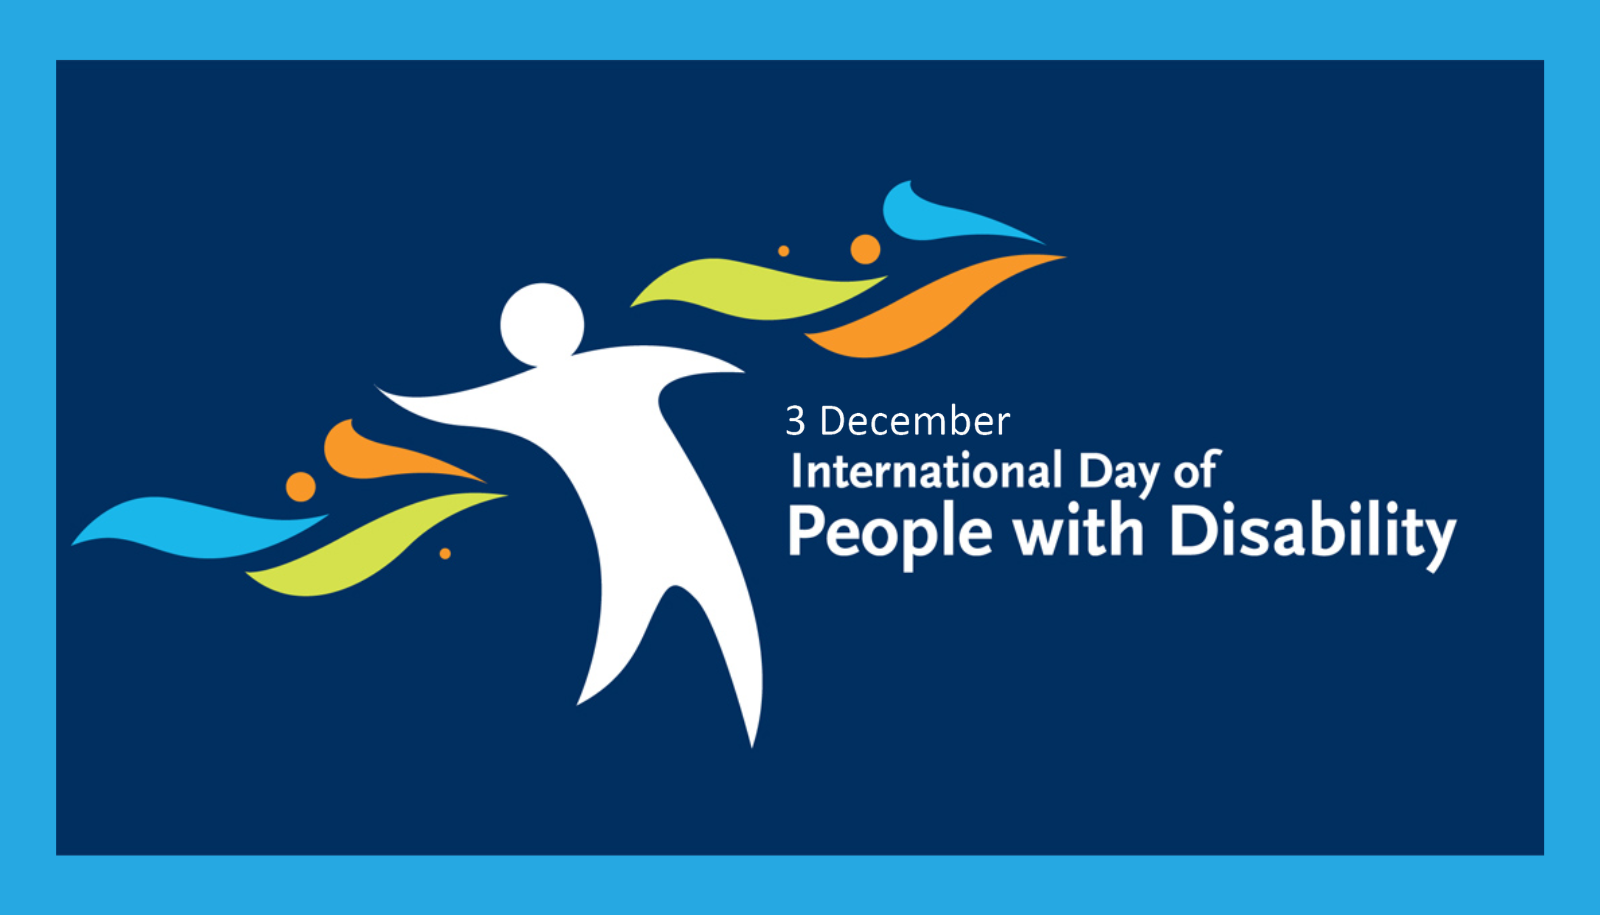 Image description: Logo of International Day of People with Disability (IDPwD)